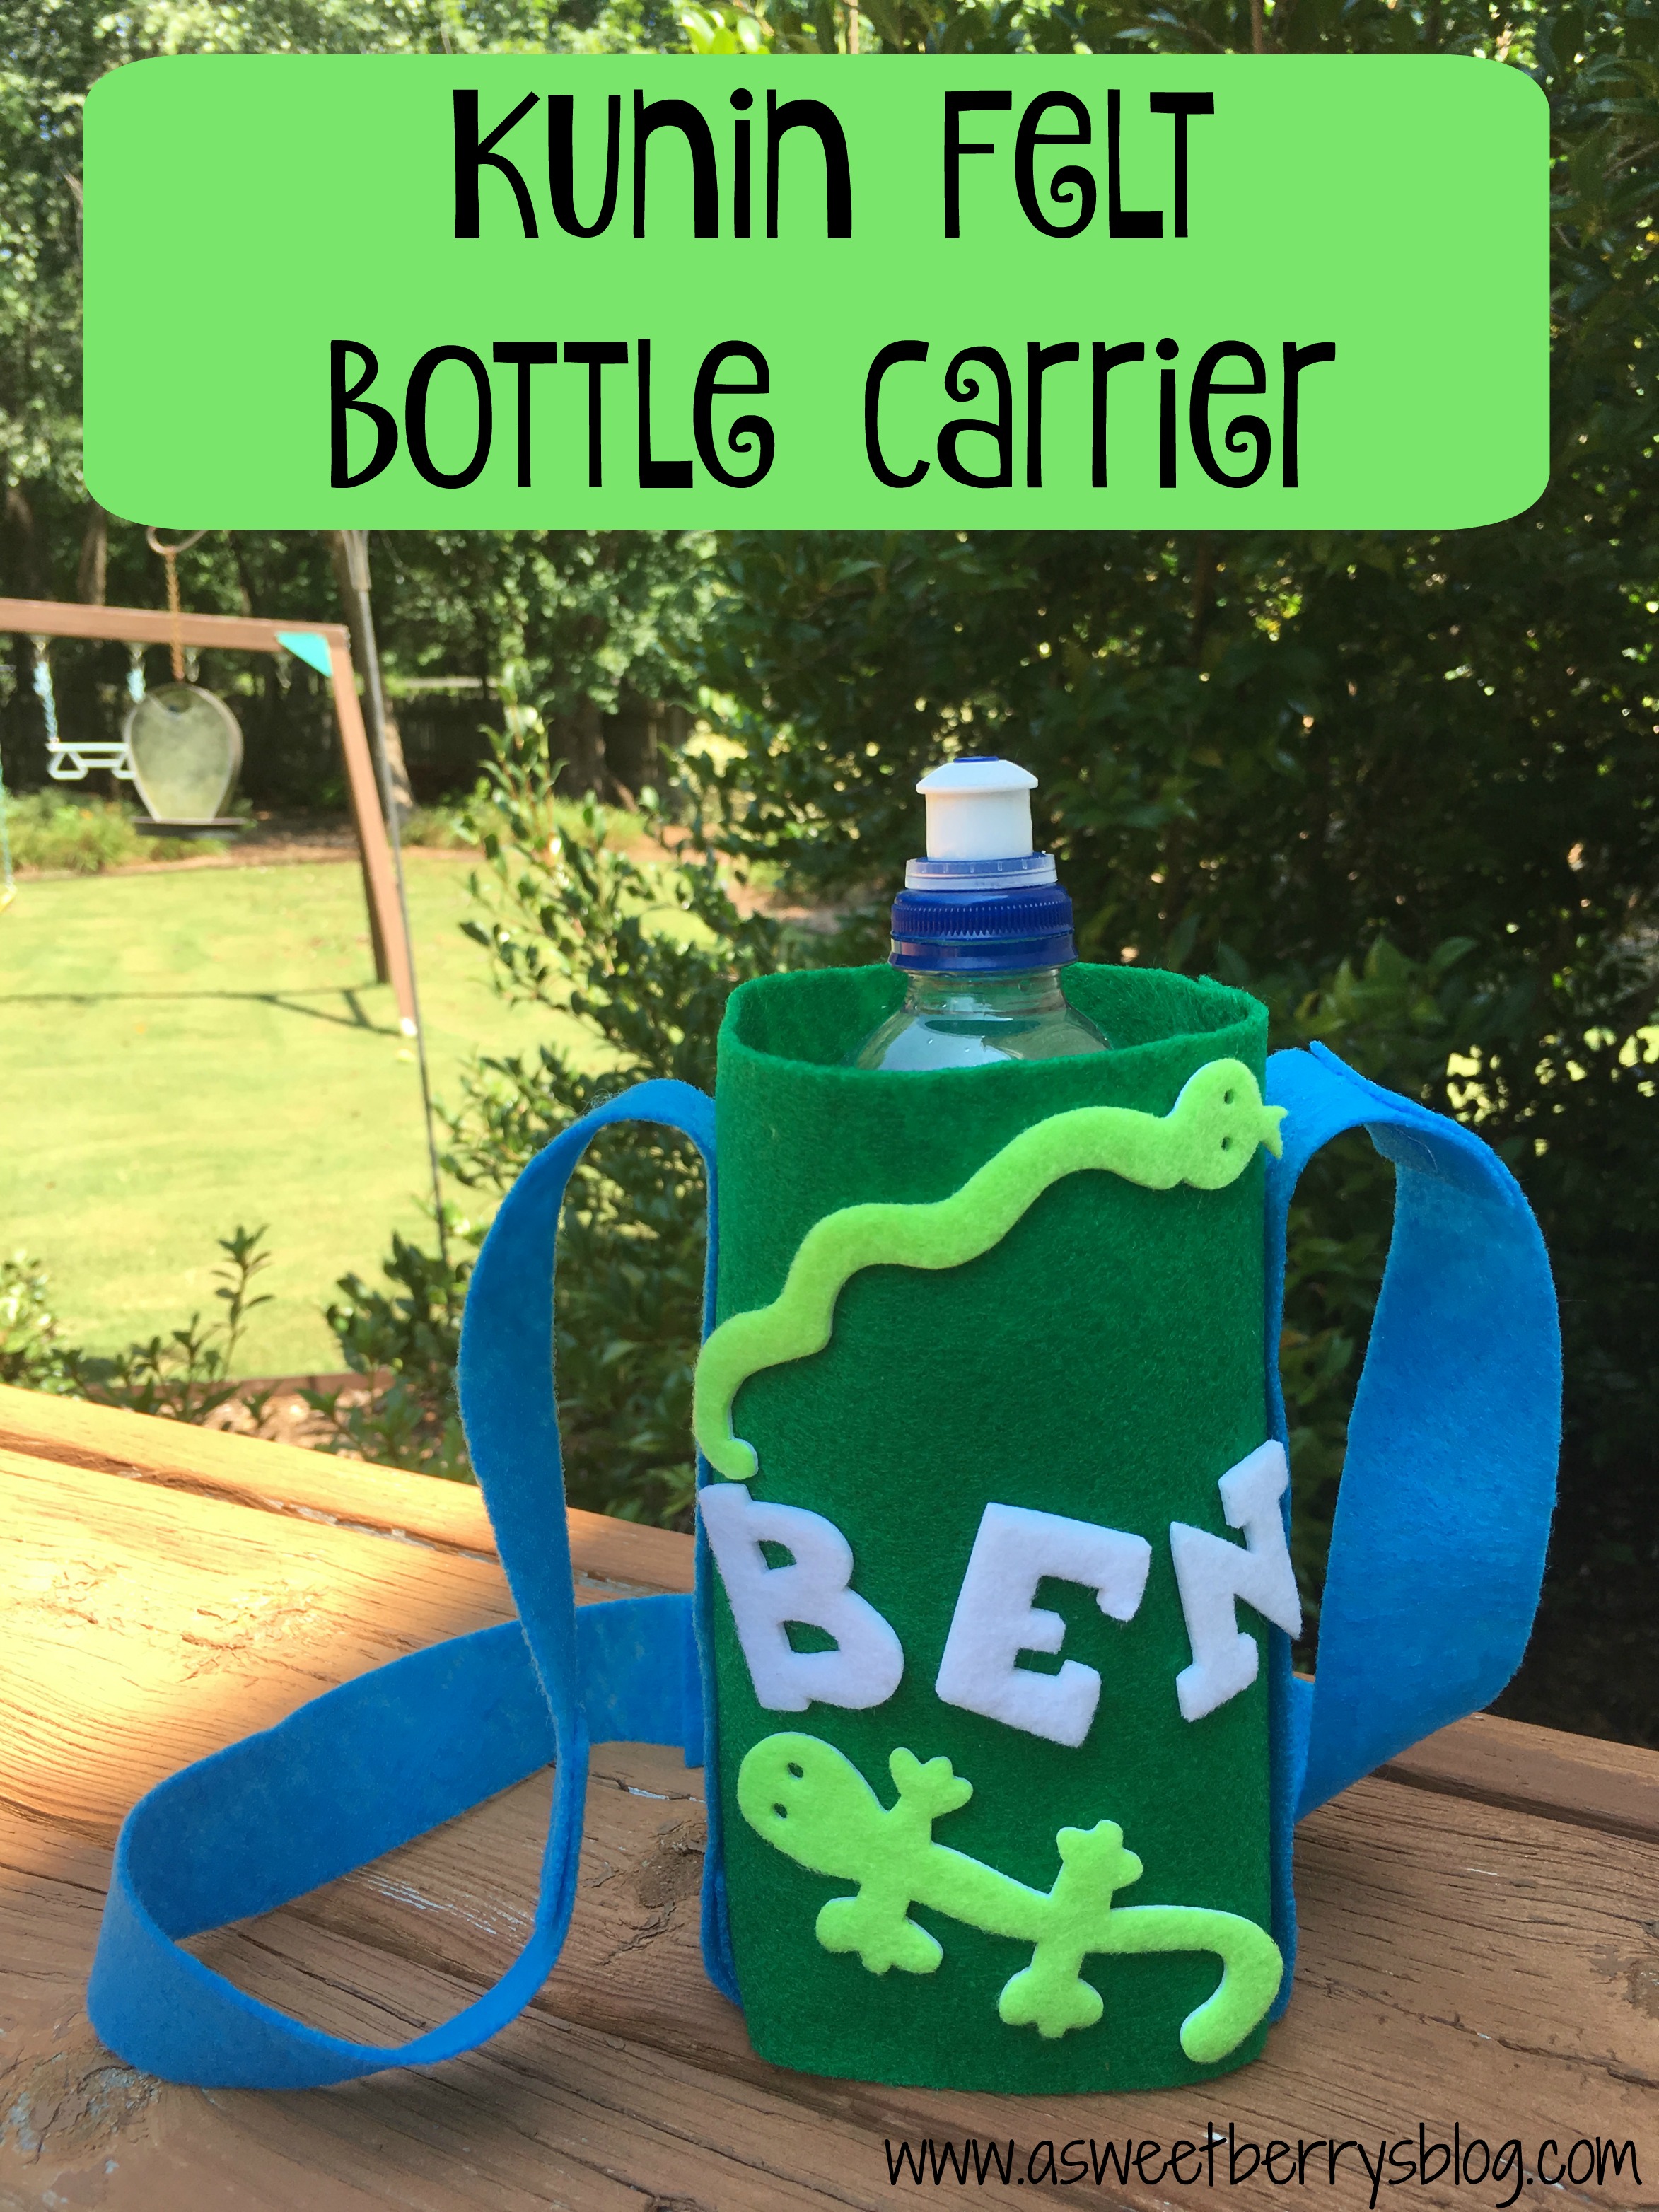 The easiest way to make a DIY fabric water bottle holder 